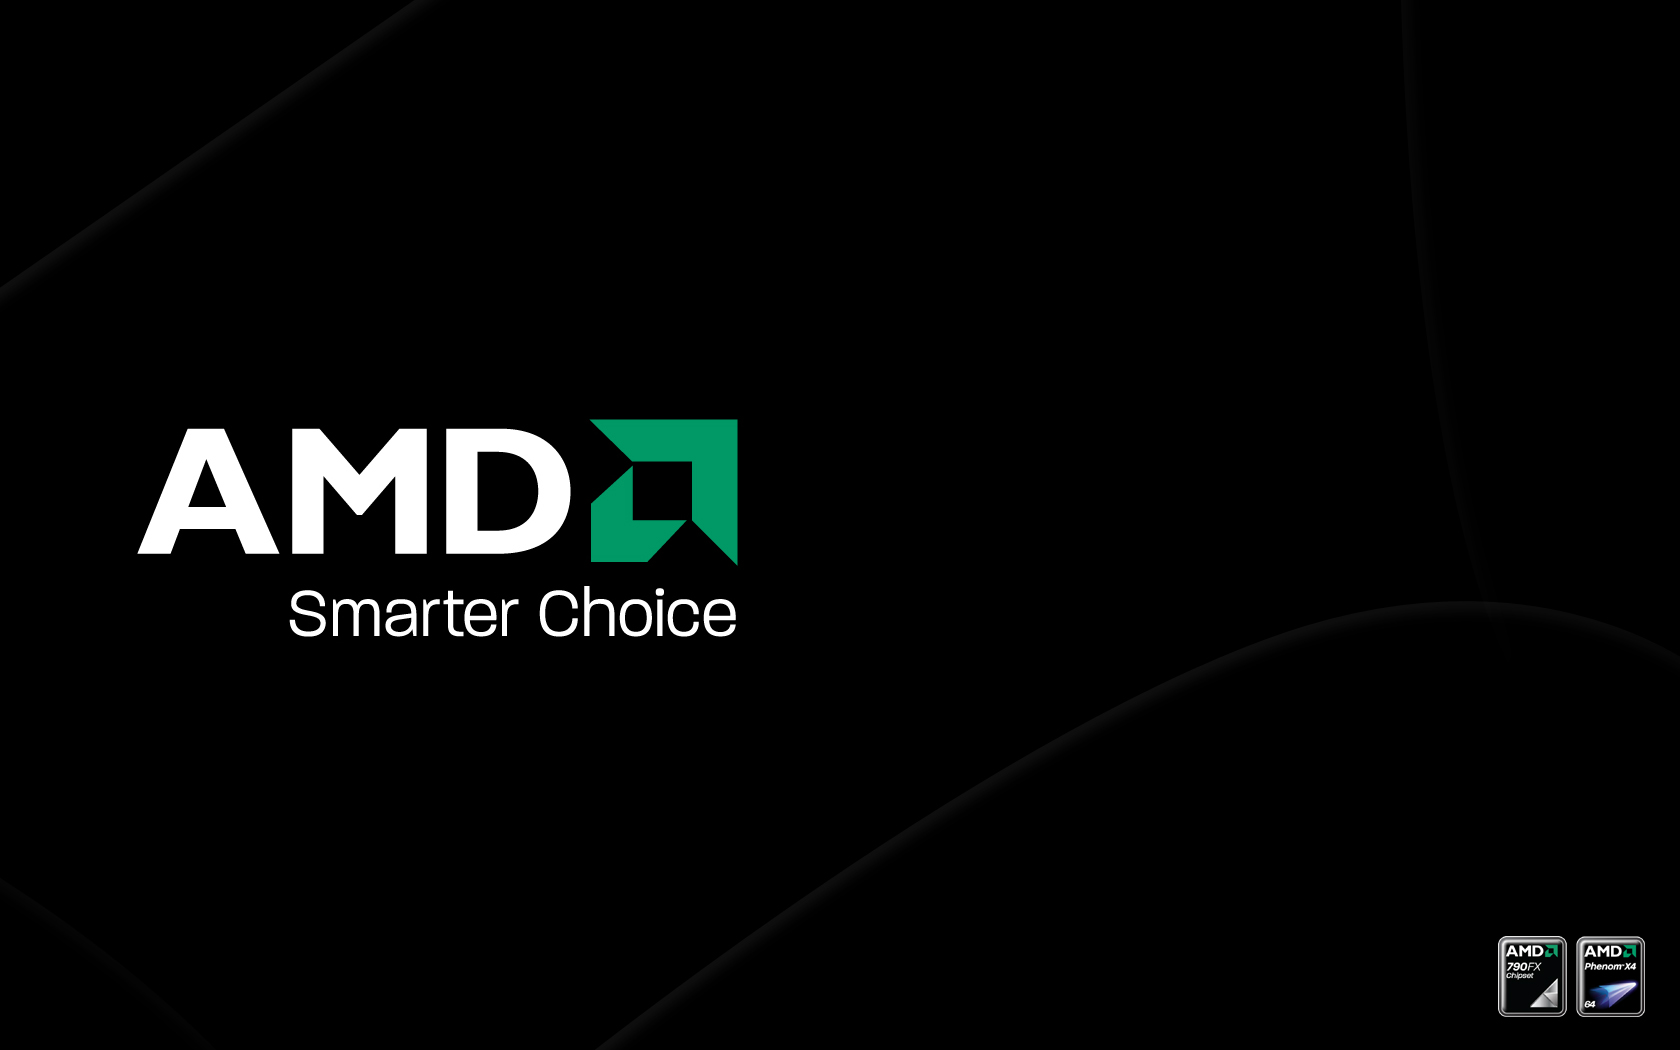 Free Download Amd Wallpapers Full Hd Wallpaper Search 1680x1050 For Your Desktop Mobile Tablet Explore 46 Amd Desktop Wallpaper Amd Logo Wallpaper Amd A10 Wallpaper Amd Fx Wallpaper